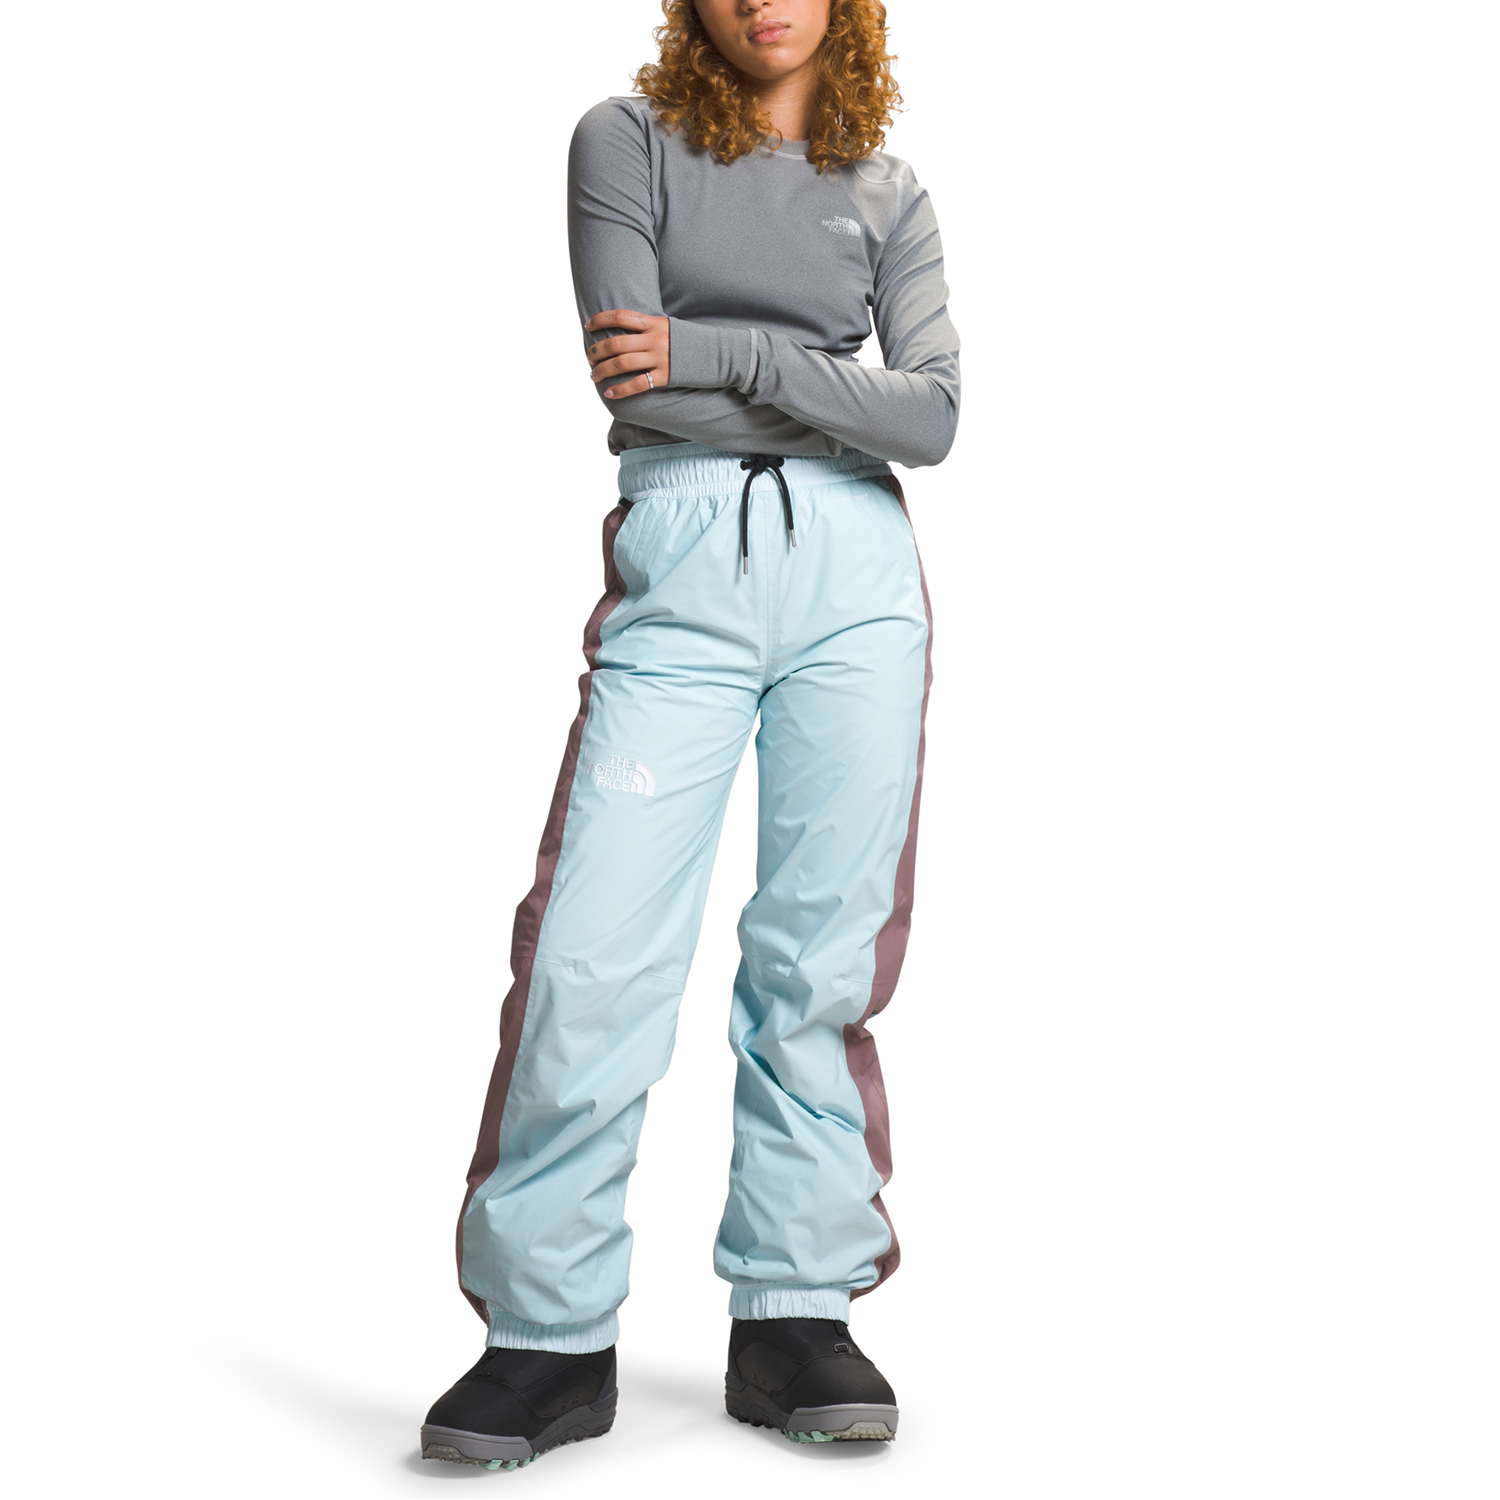 The North Face Build Up Pants - Women's